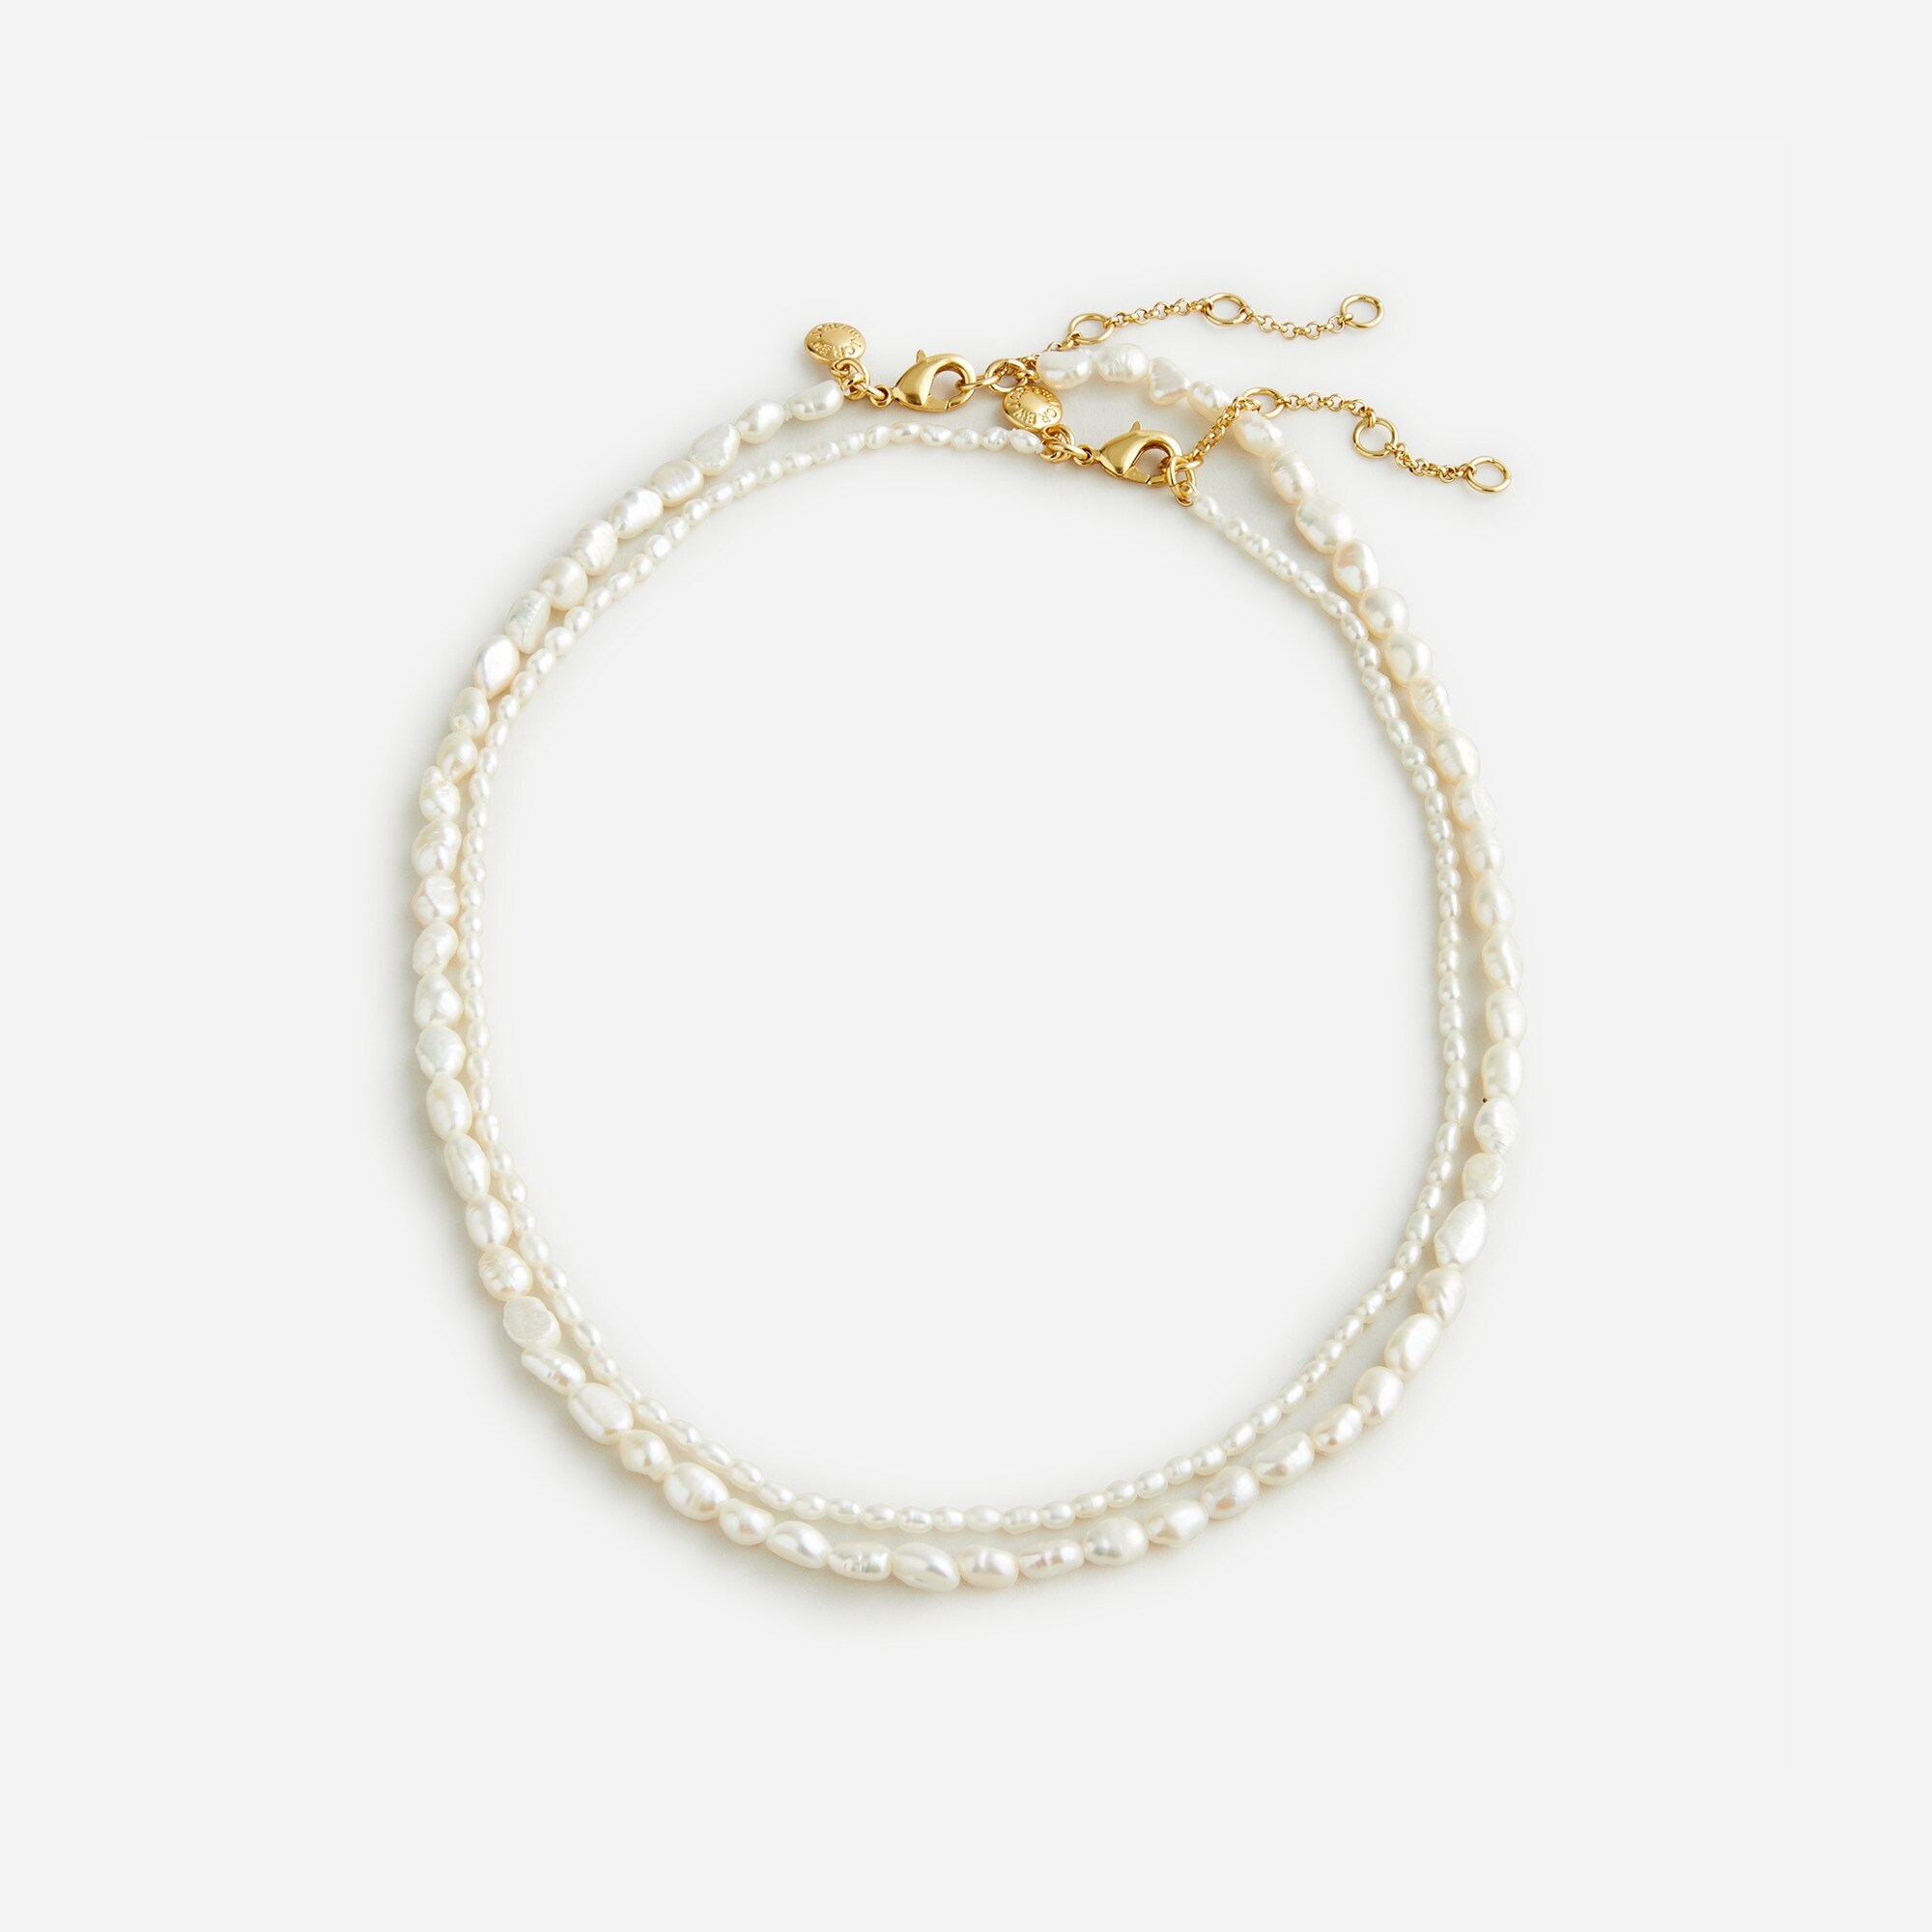  Double-strand freshwater pearl necklace